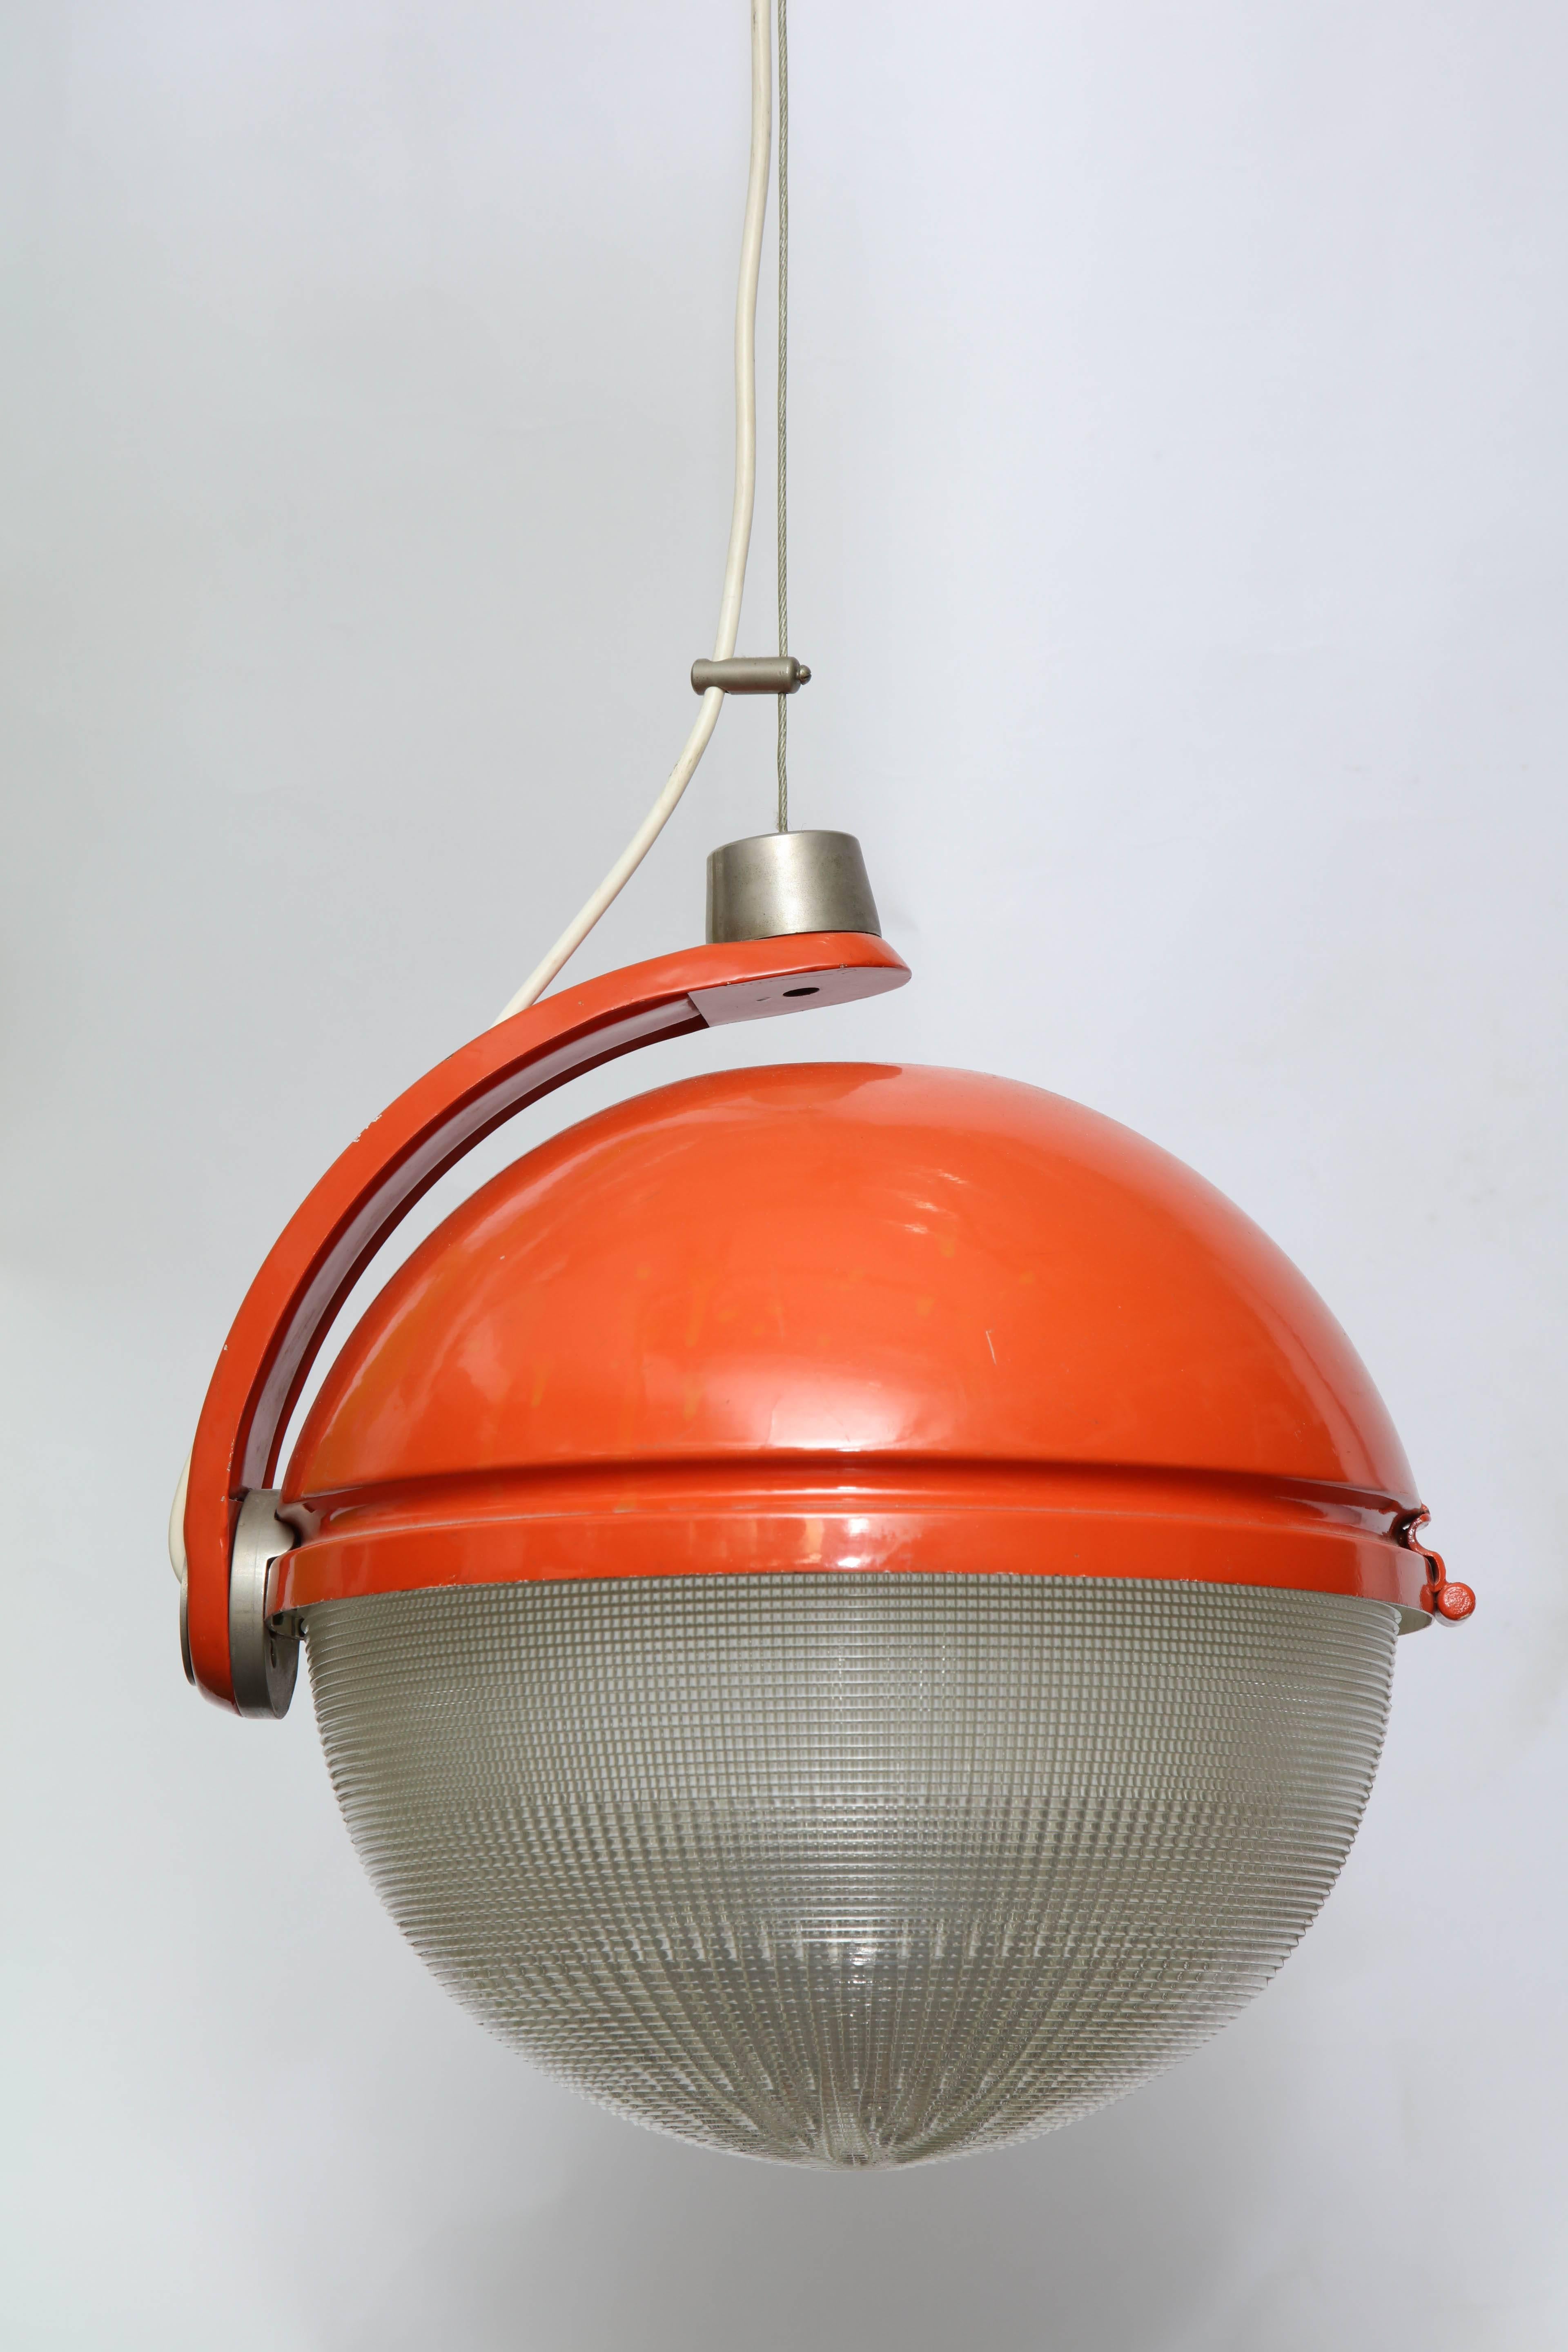 Ceiling Fixture Mid Century Modern shade rotates Italy 1960's
New Sockets and Rewired